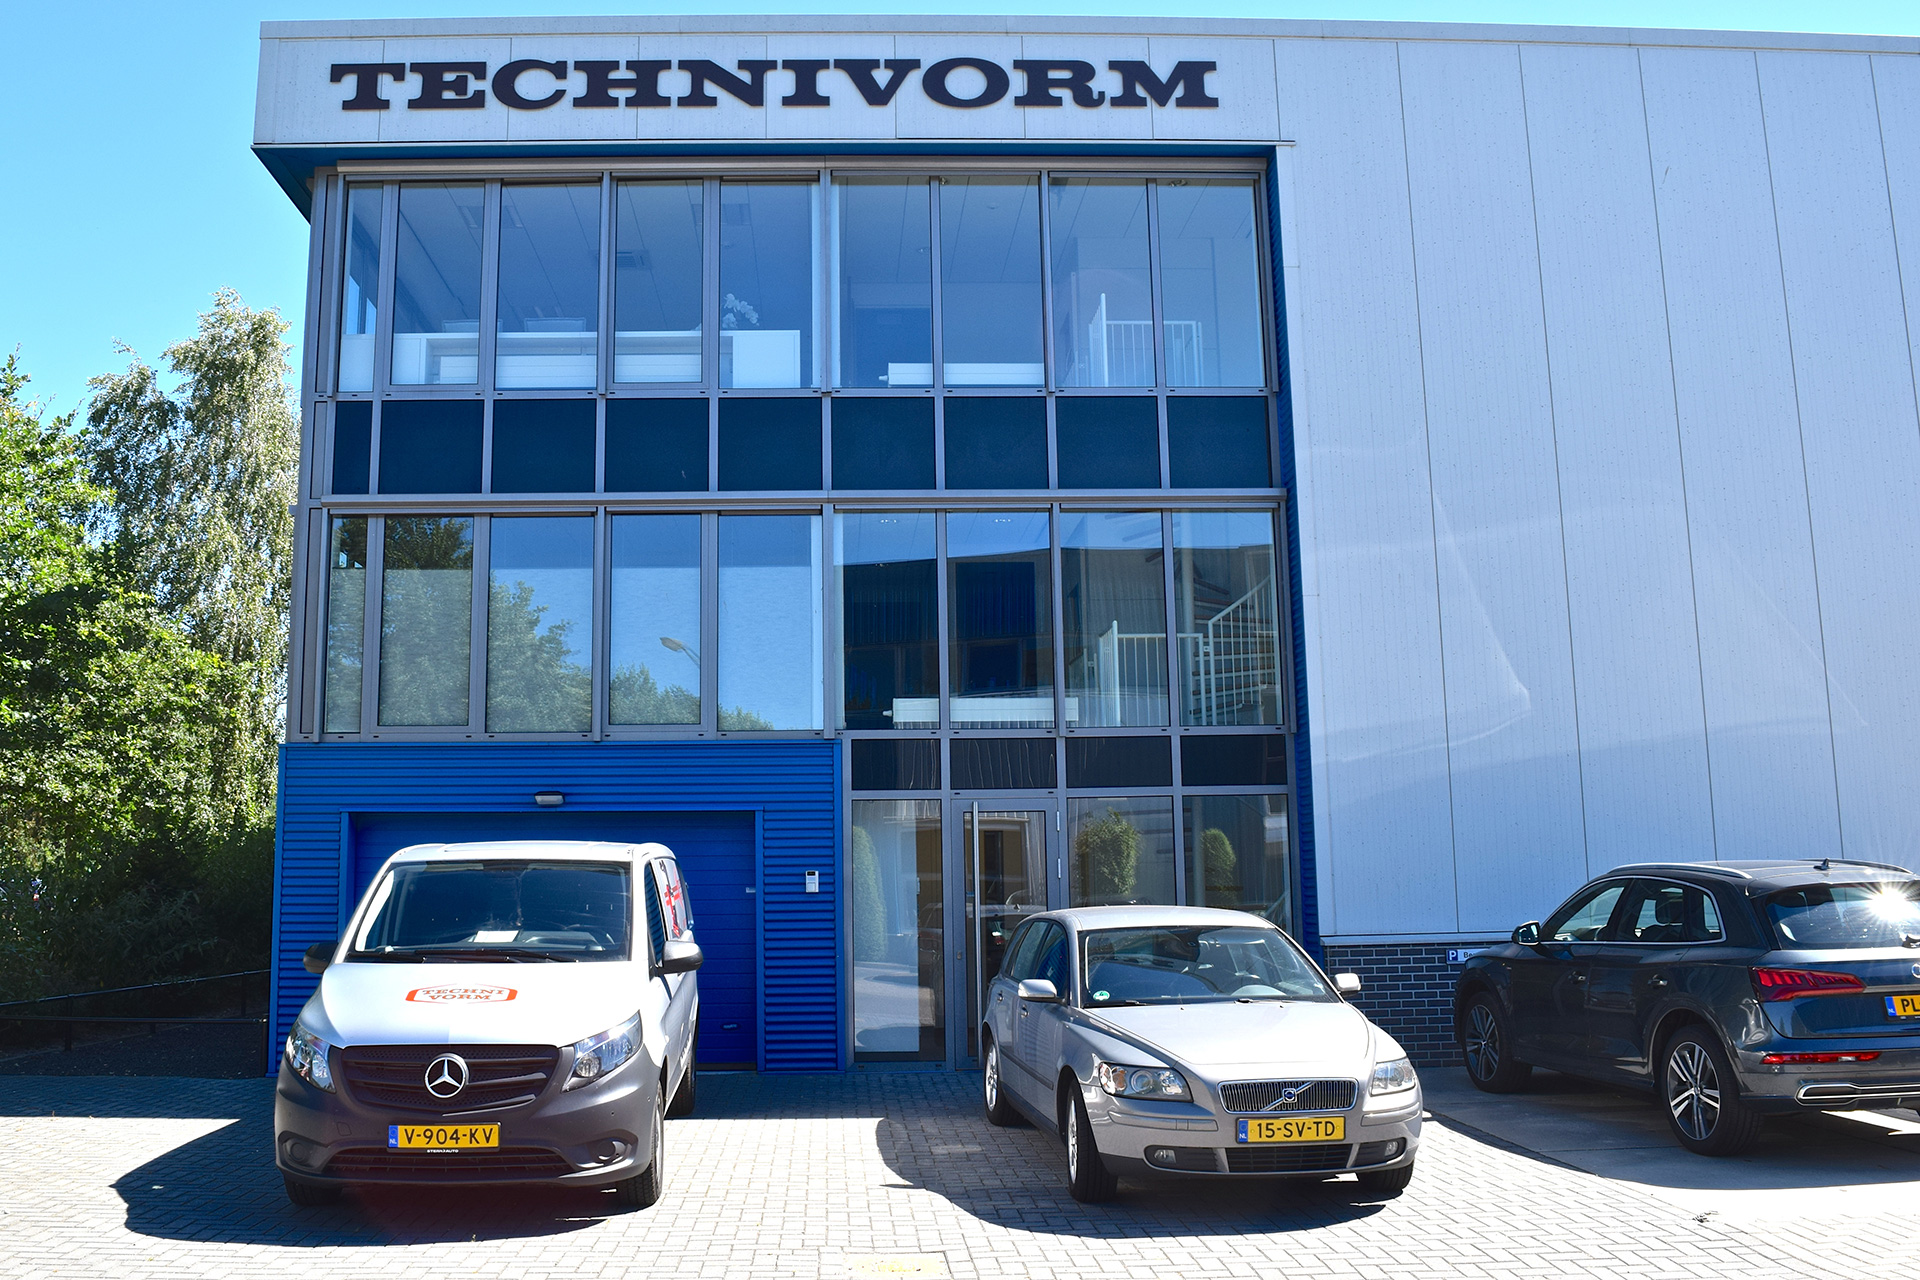 The Making Of A Master: Inside The Technivorm Factory photo